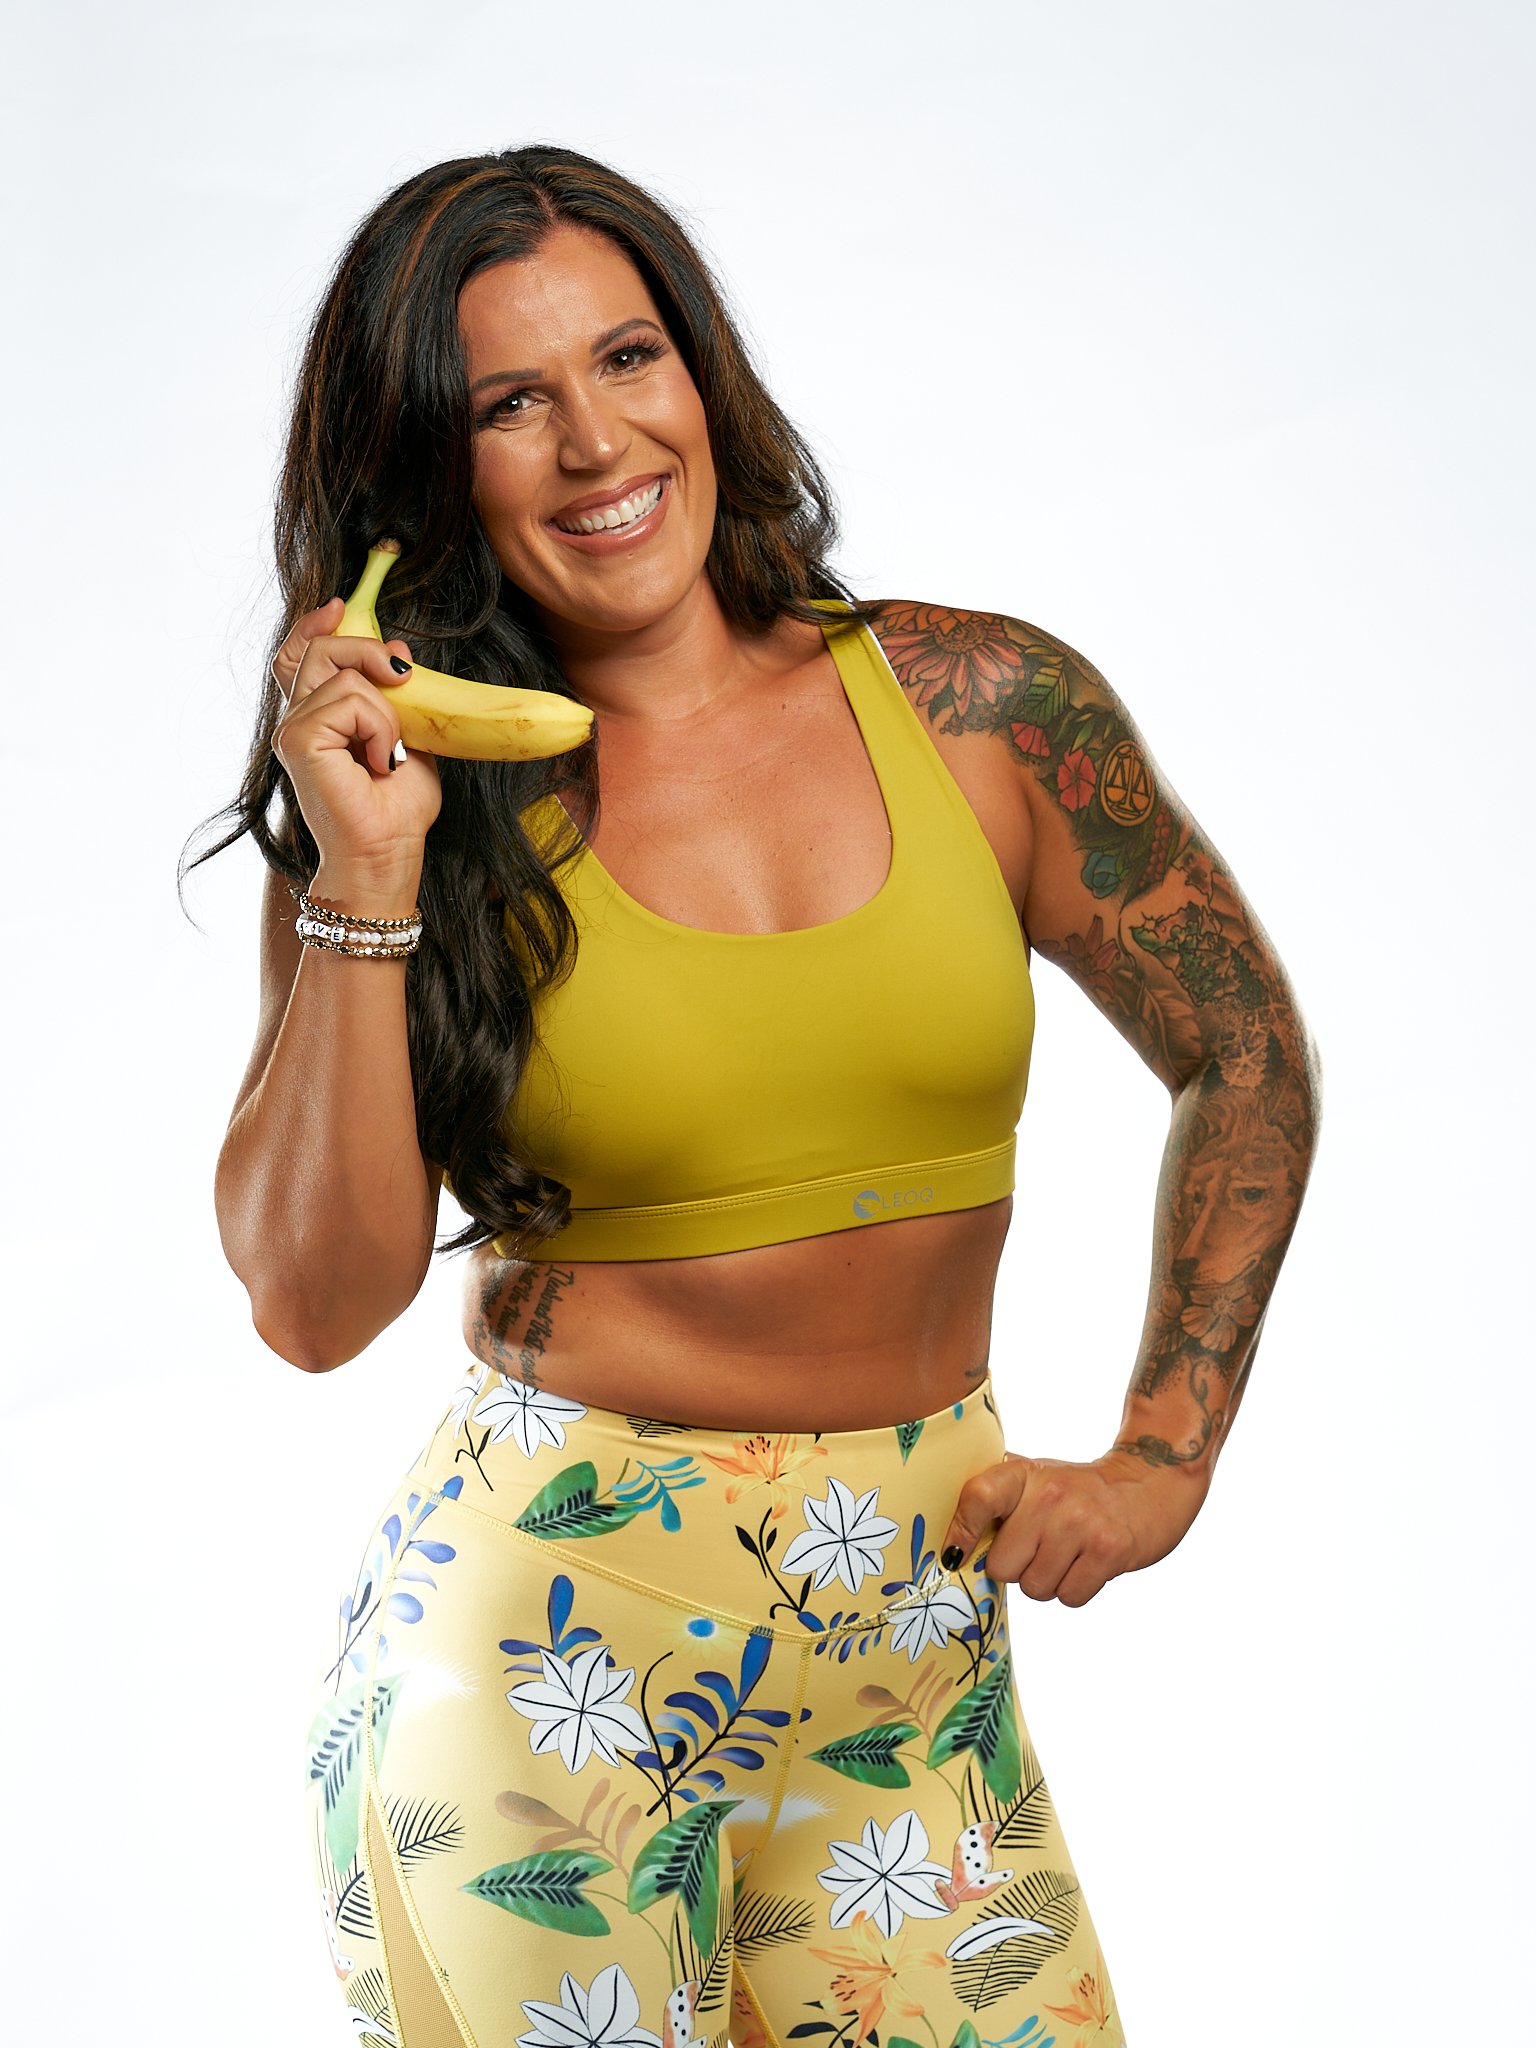  Fitness Model dressed in yellow posing with a banana like a telephone during her fitness photoshoot to relate that she is also a nutritionist.  